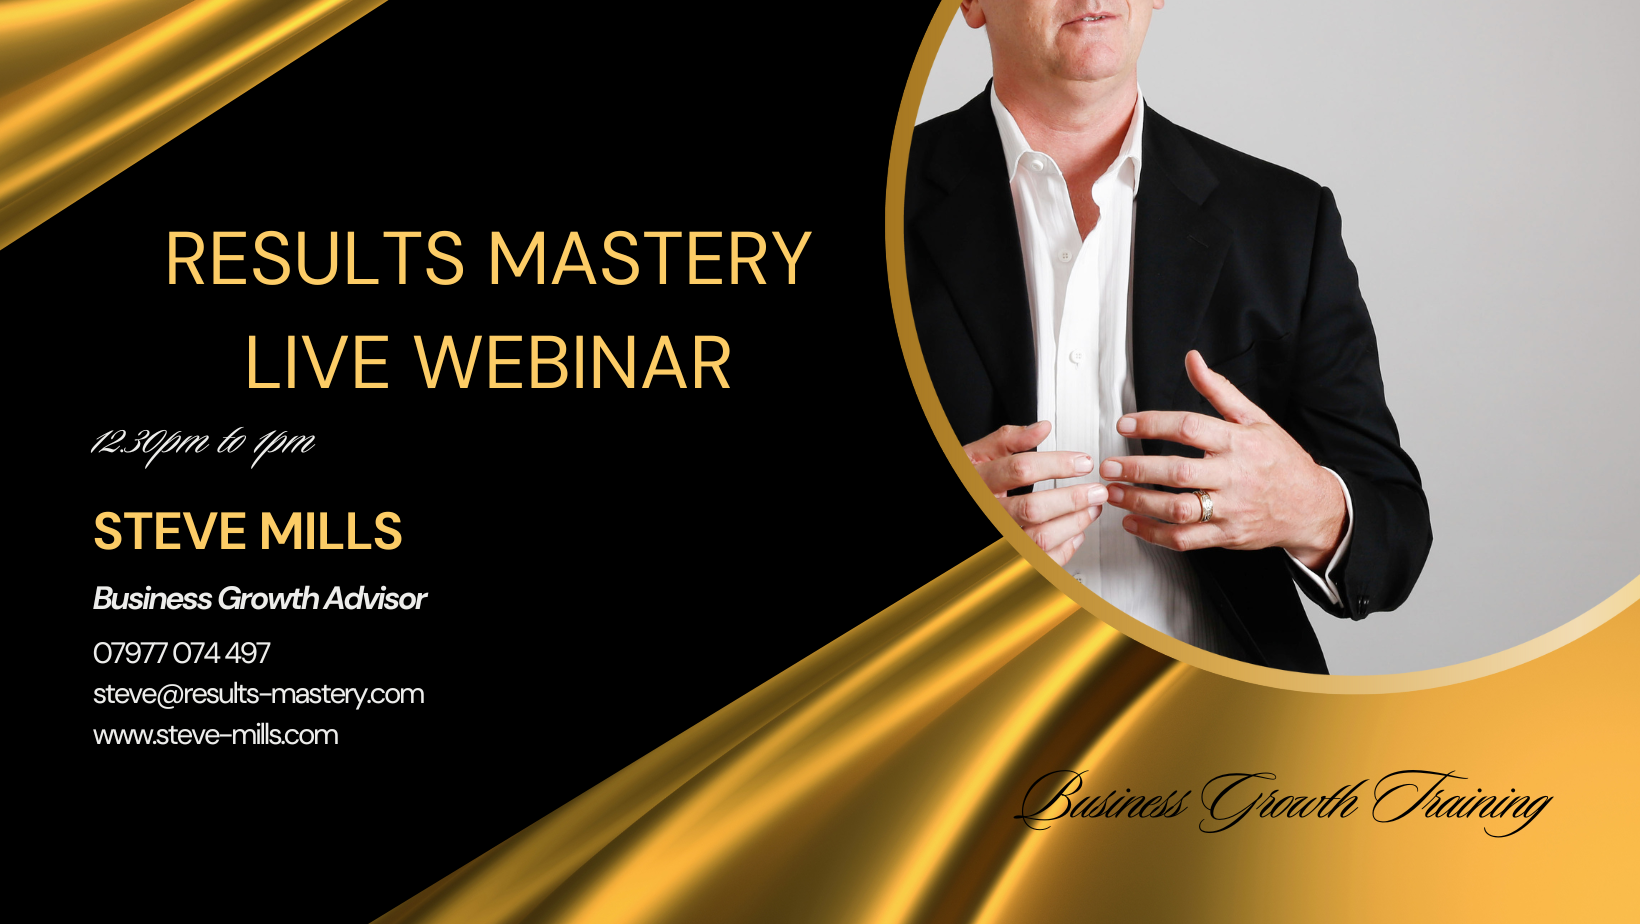 Steve Mills - results mastery live